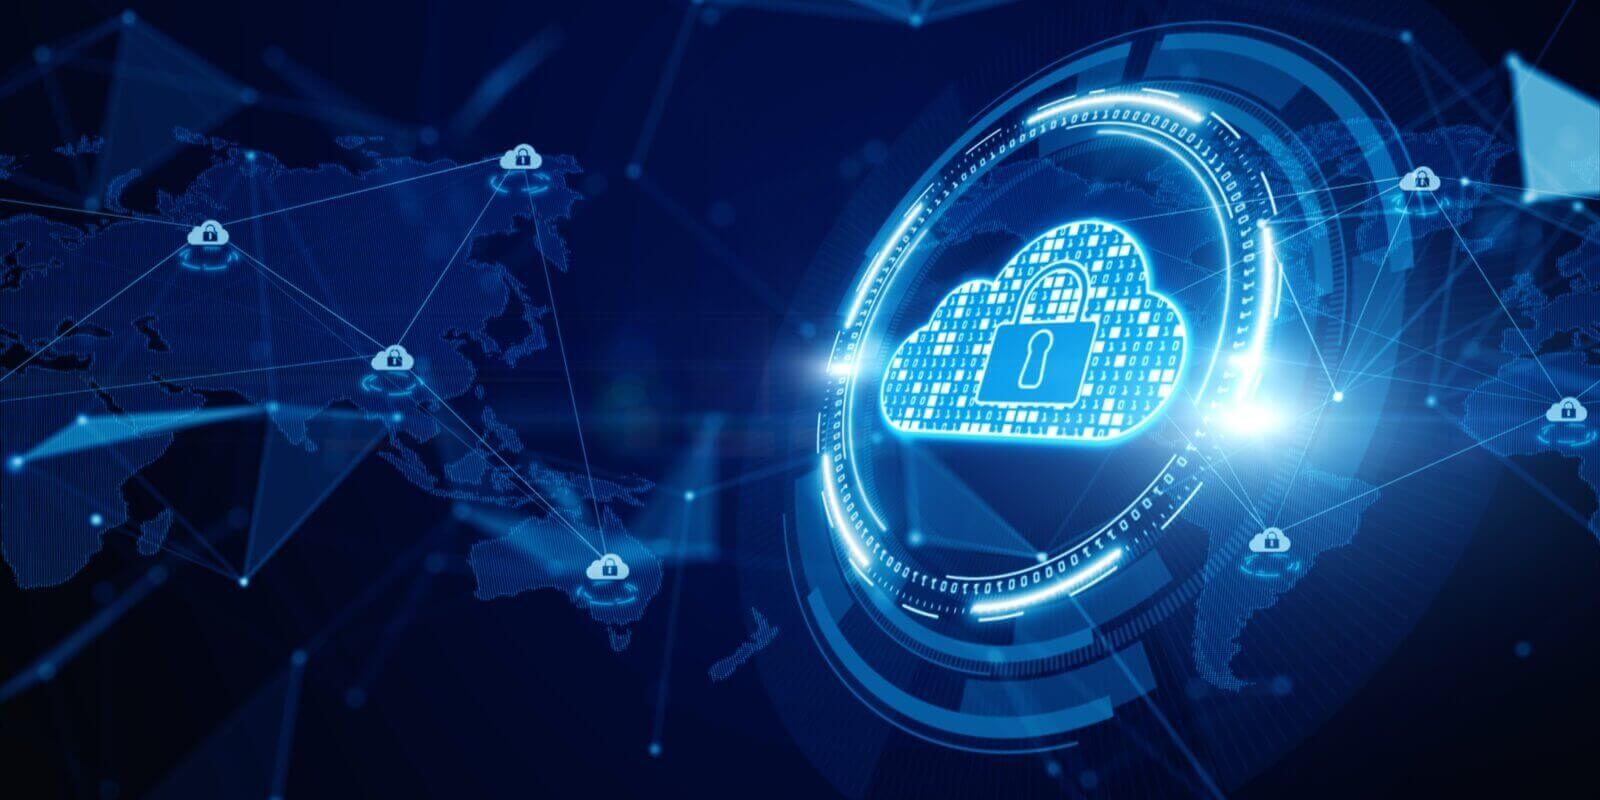 digital cloud computing and cyber security